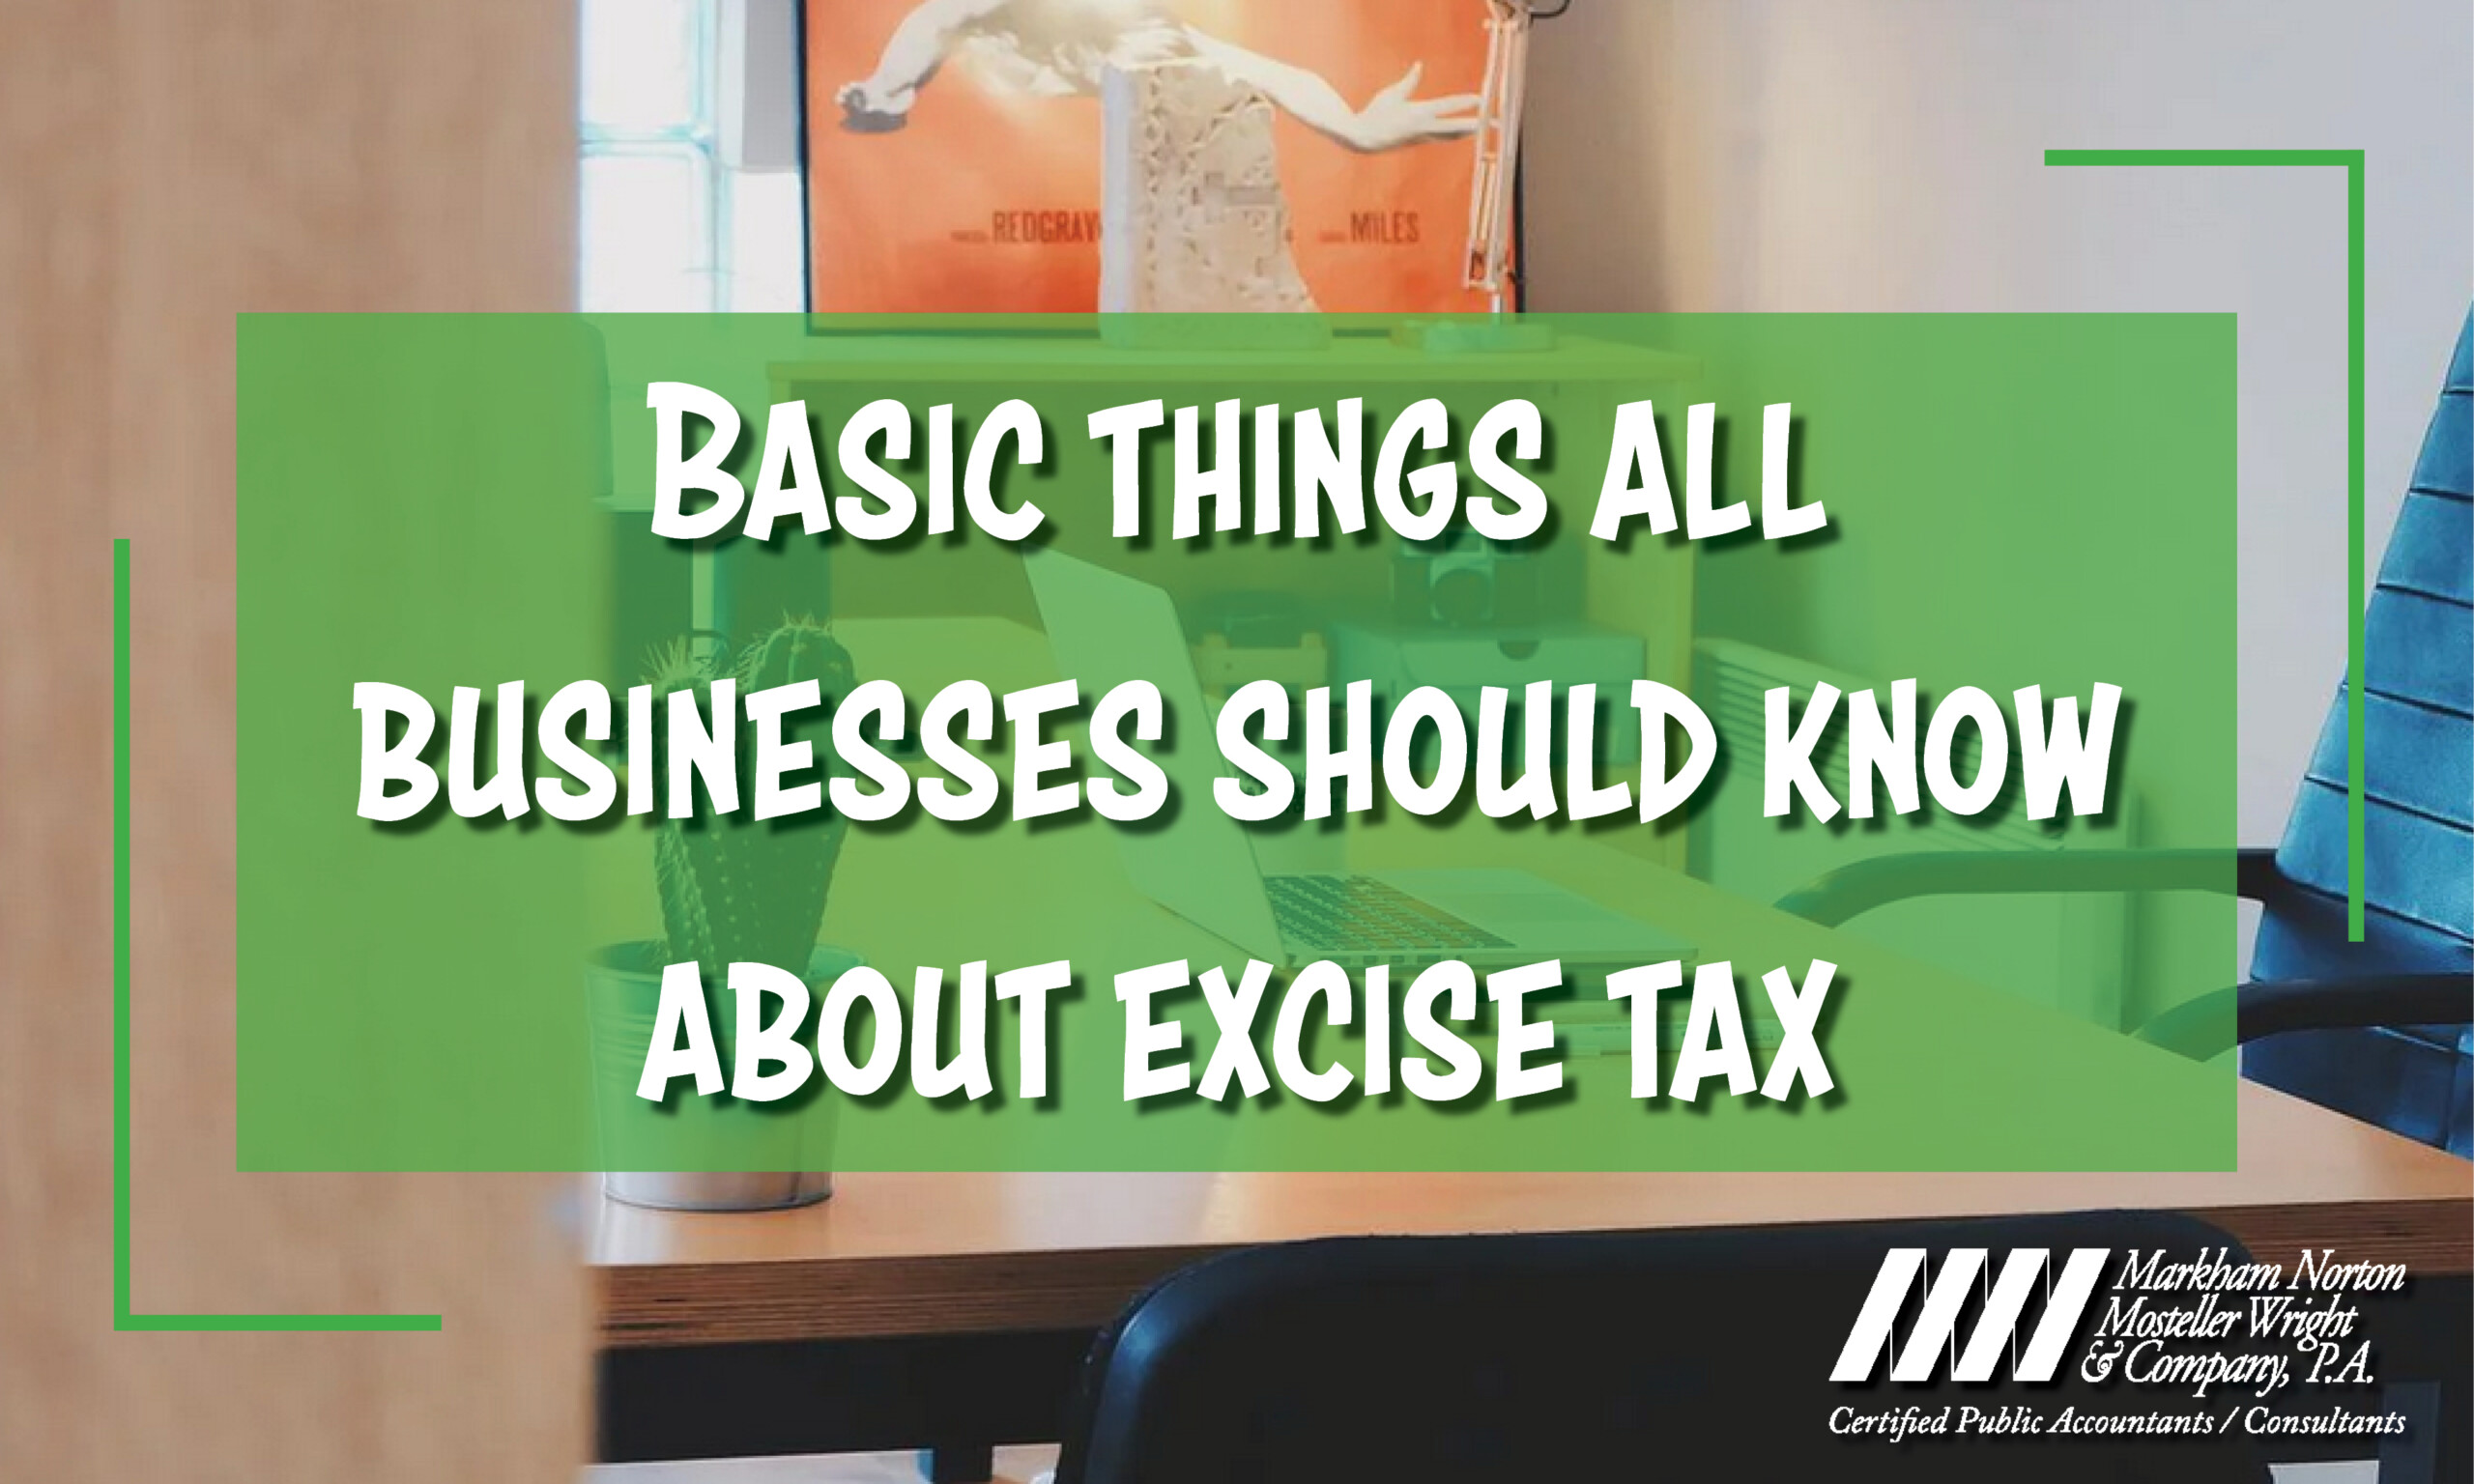 Businesses and Excise Tax